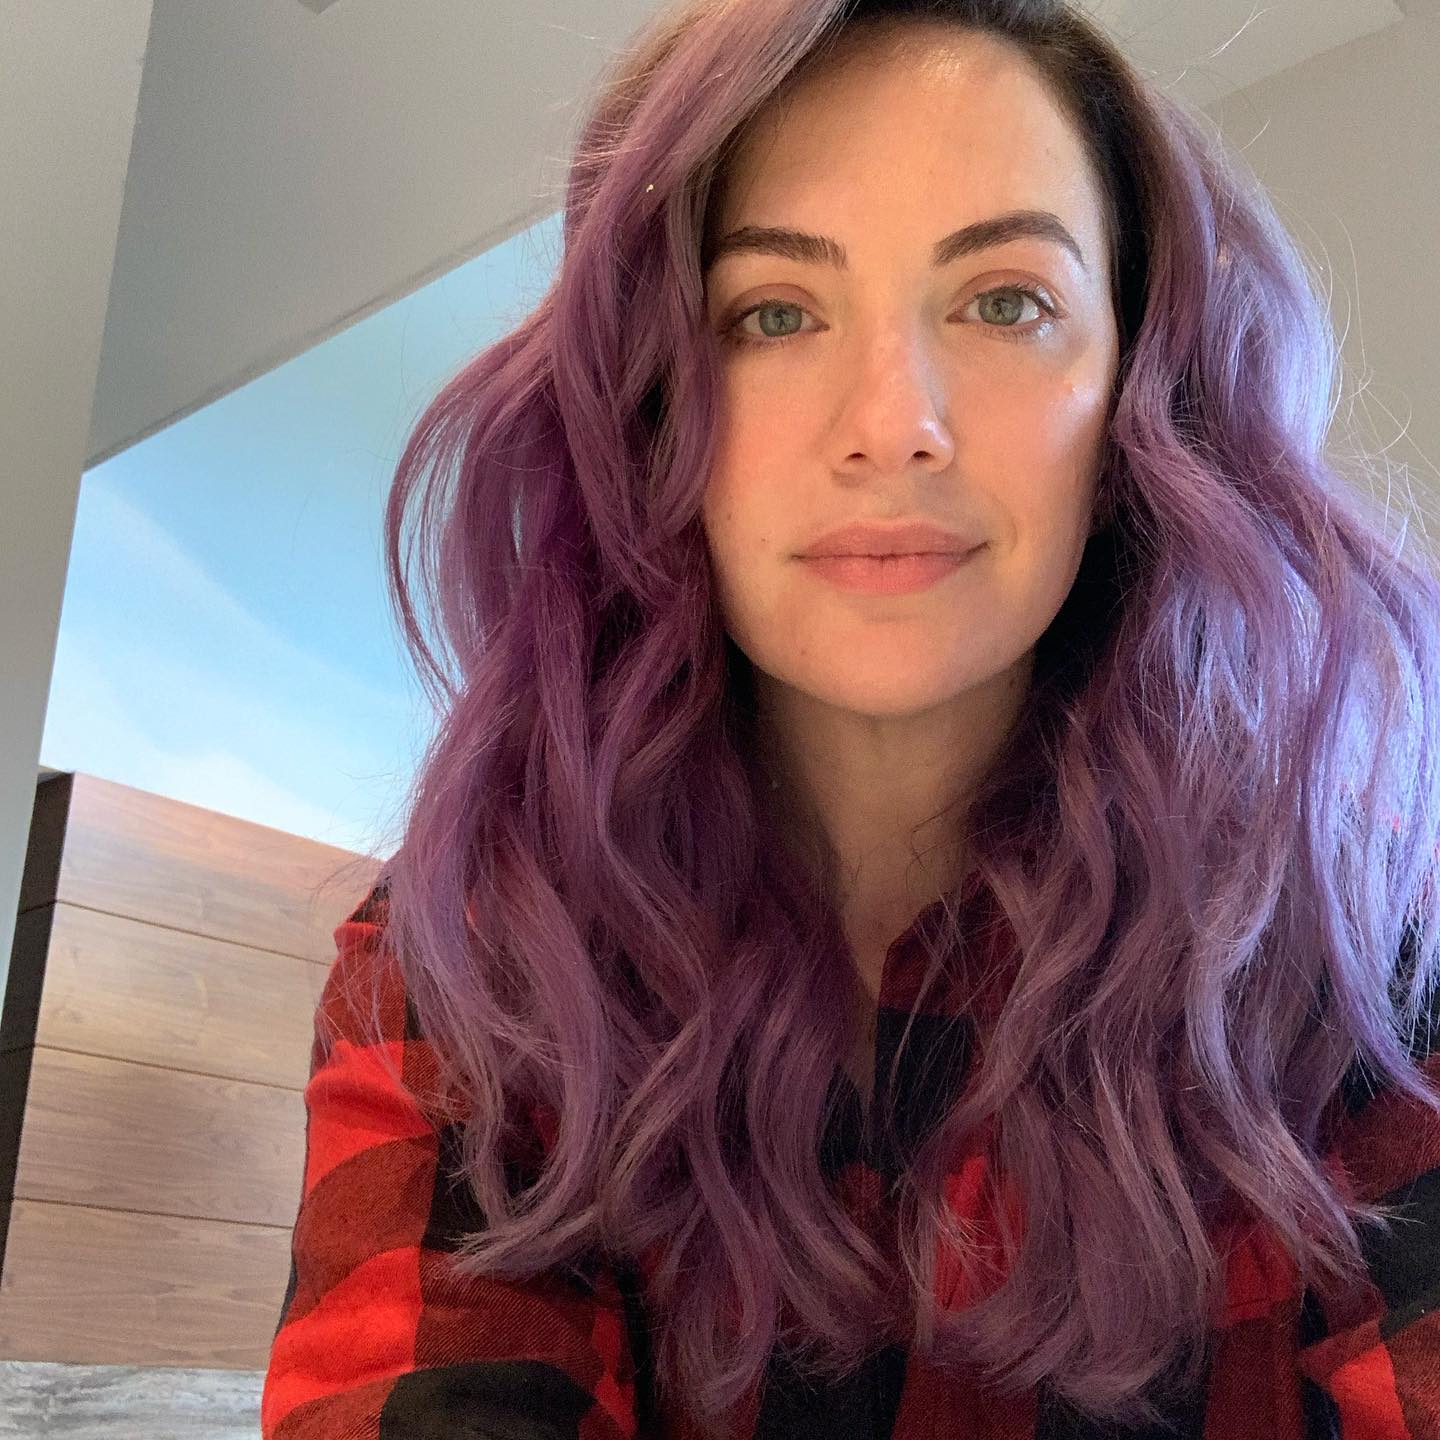 Actress Kate Siegel Phone Number and Addresses